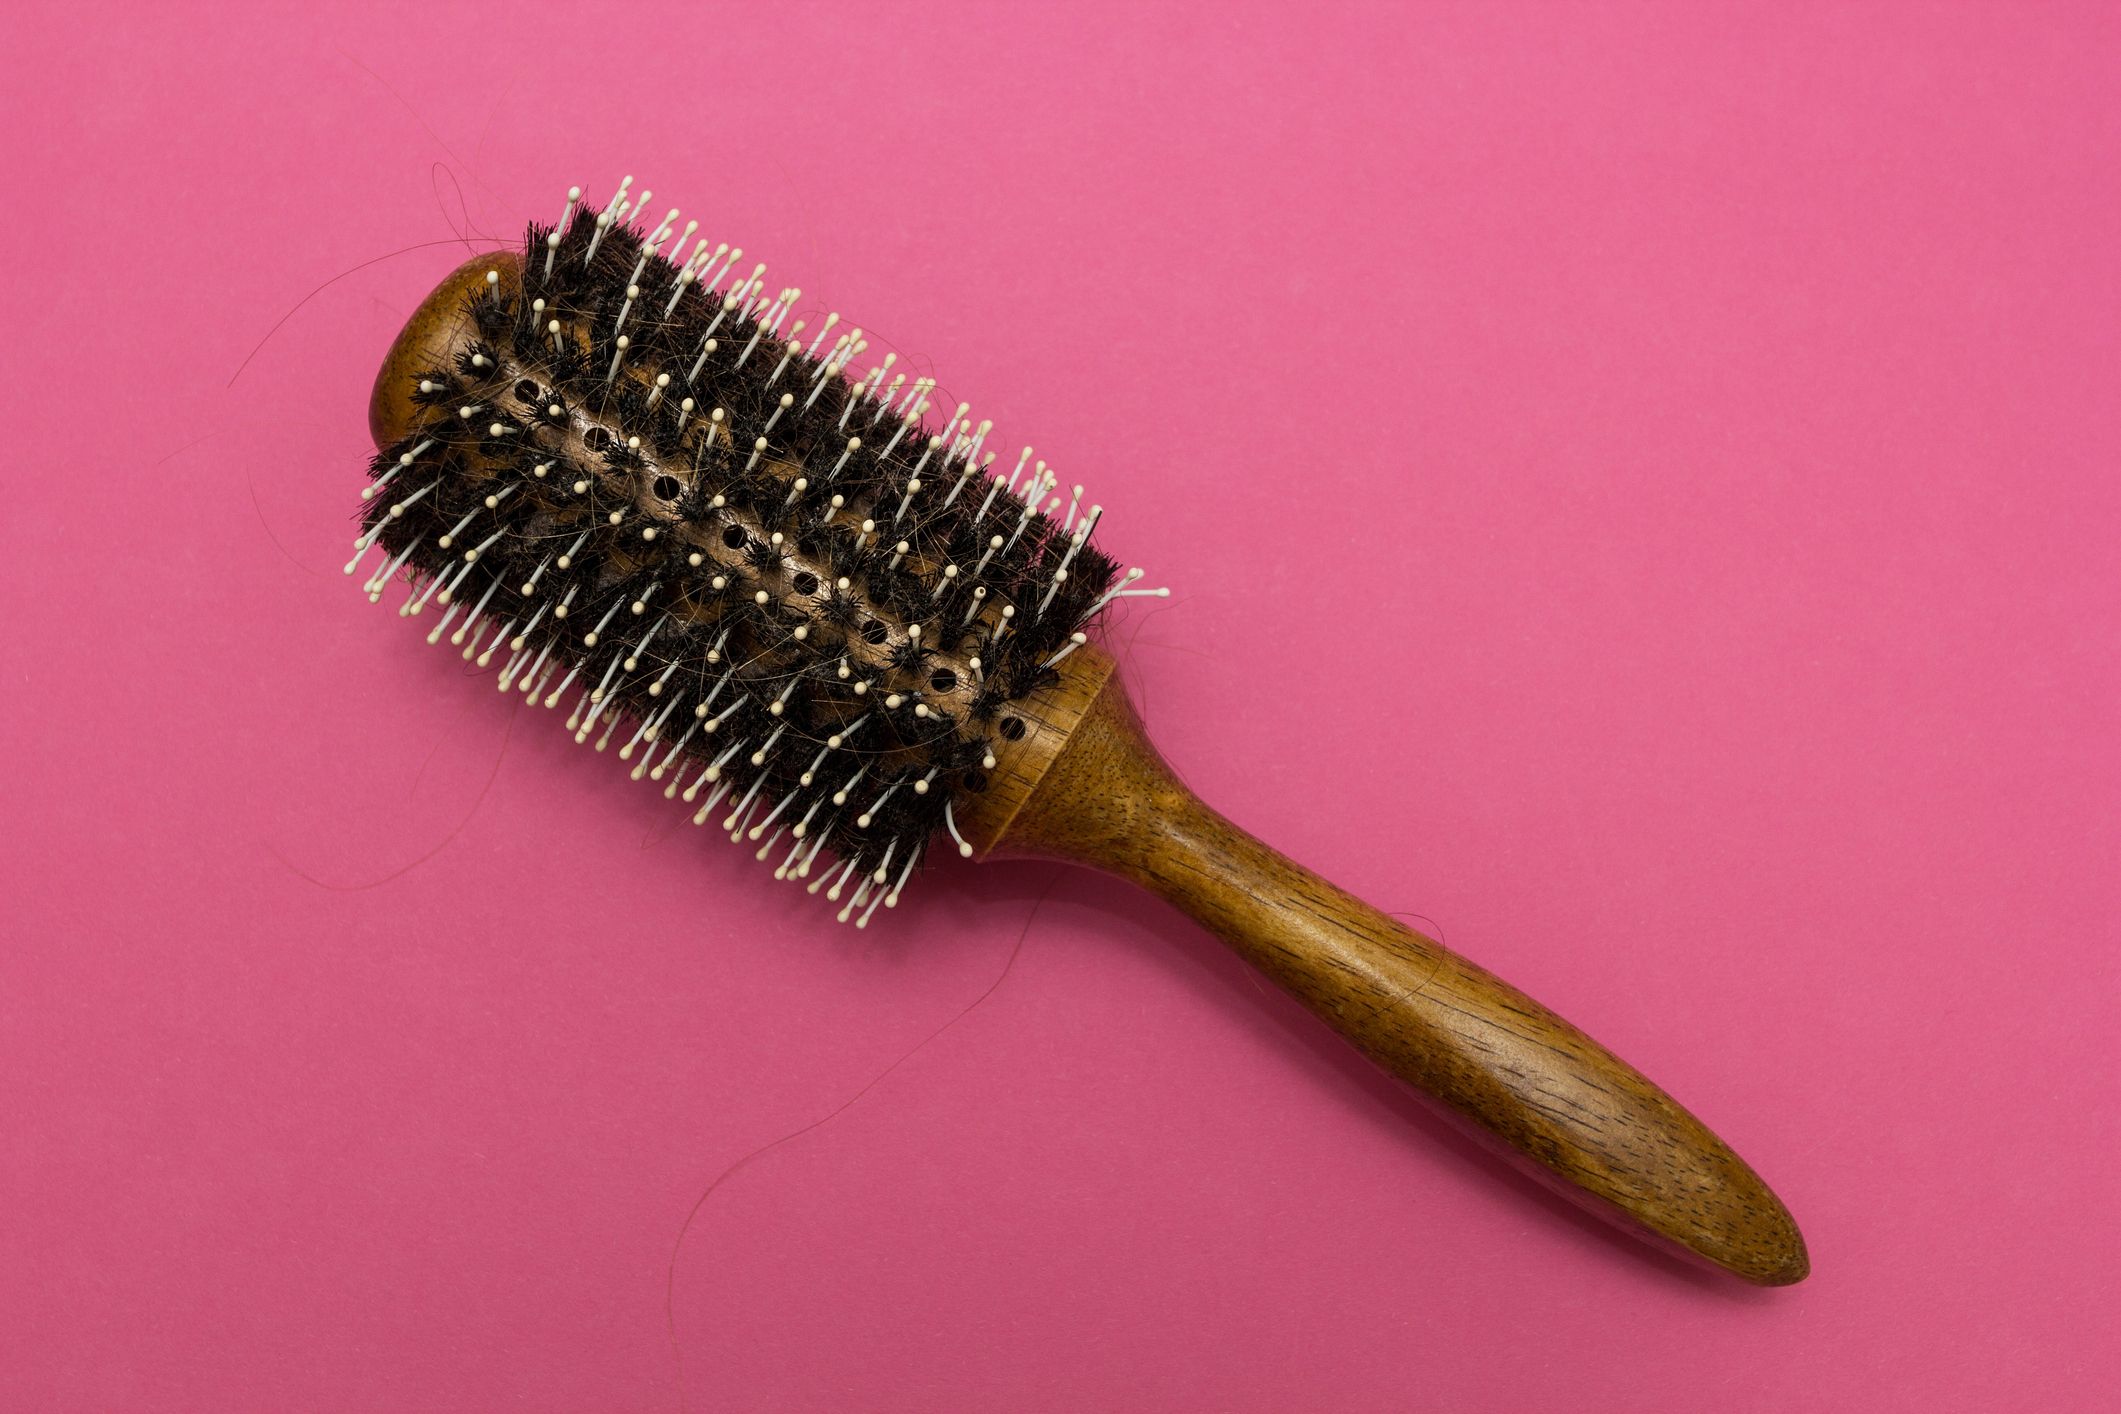 3 Ways to Clean Hairbrushes and Combs - wikiHow